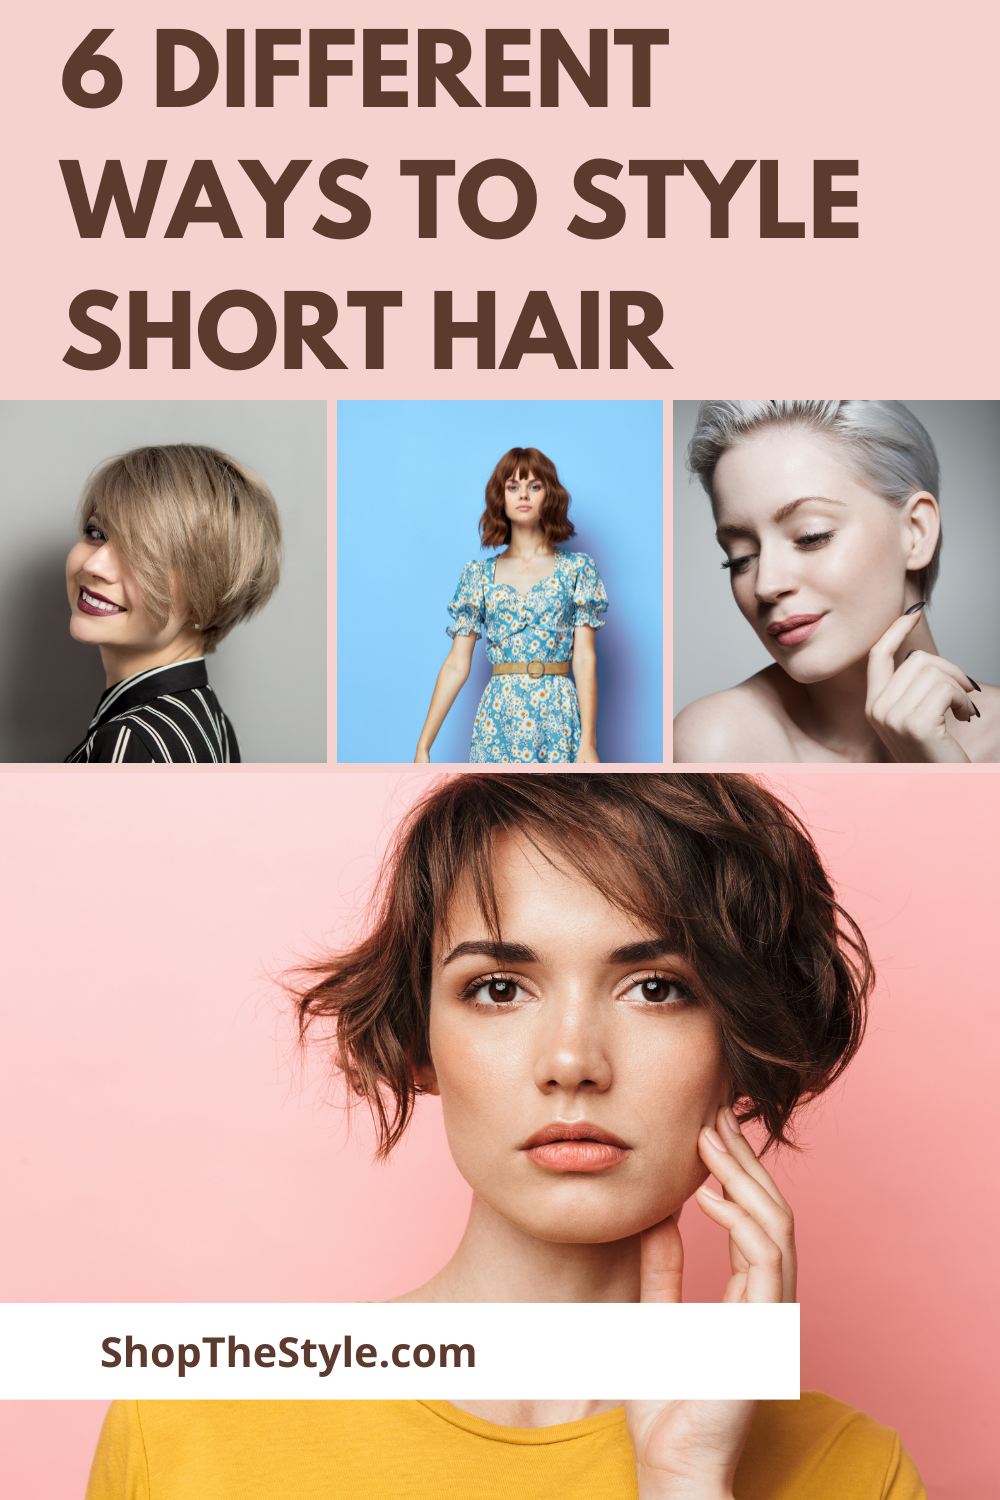 6 Different Ways To Style Short Hair